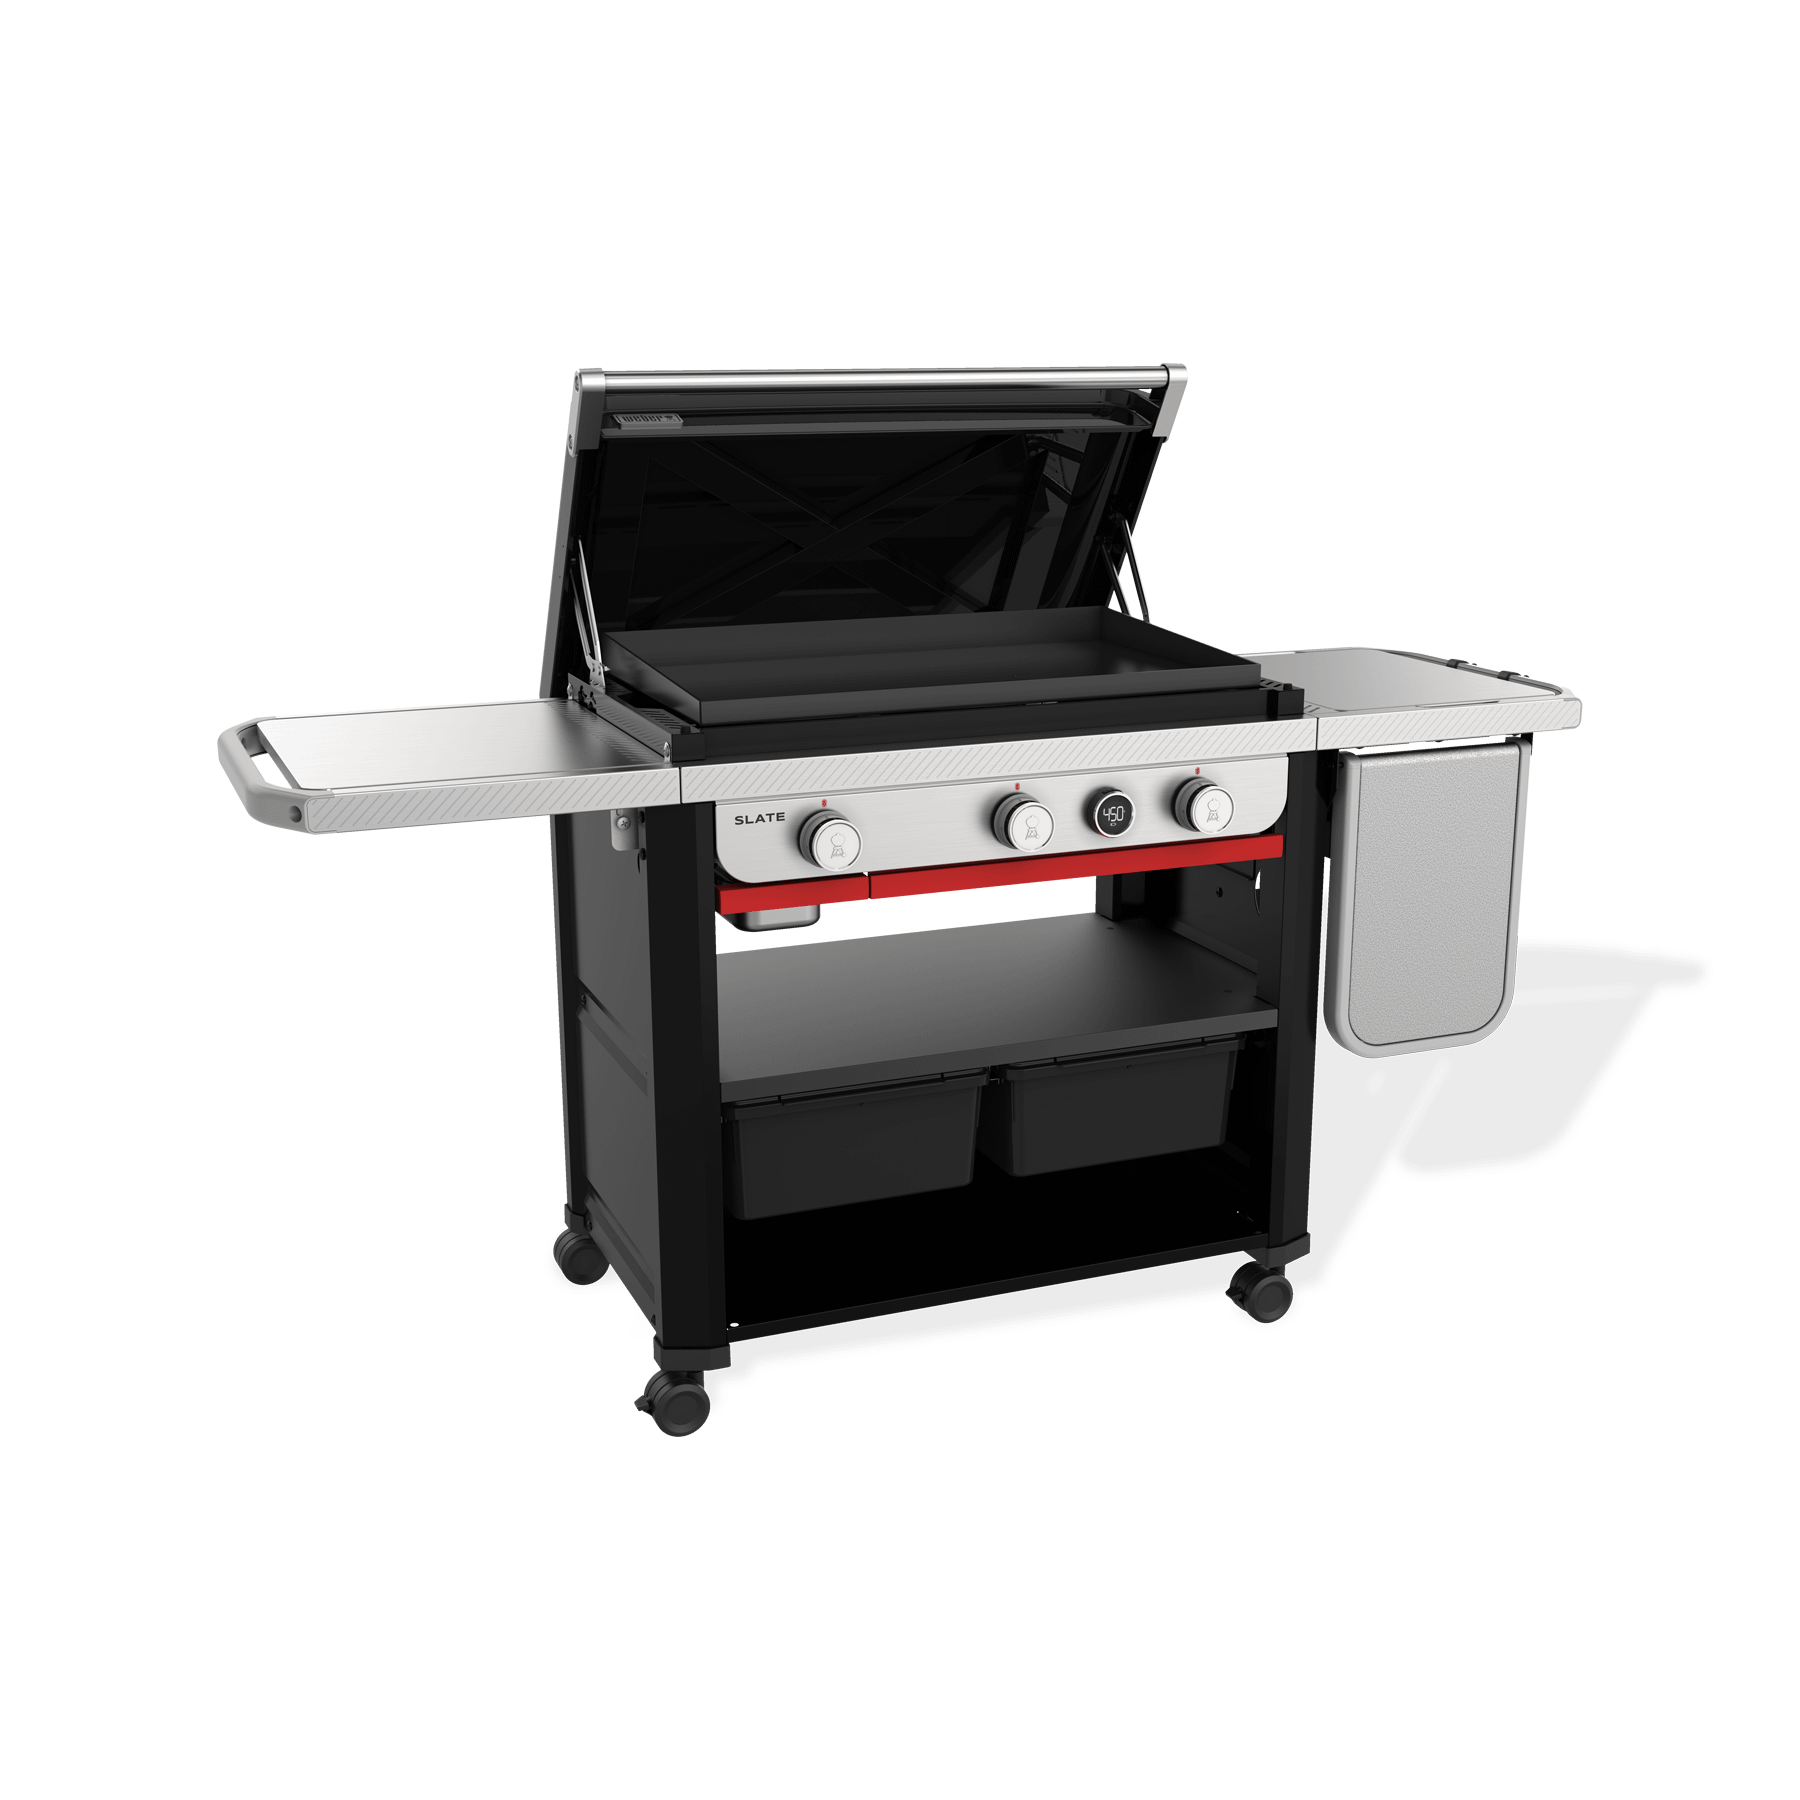 Weber Slate™ 30" Rust-Resistant Griddle with extendable side table - Black